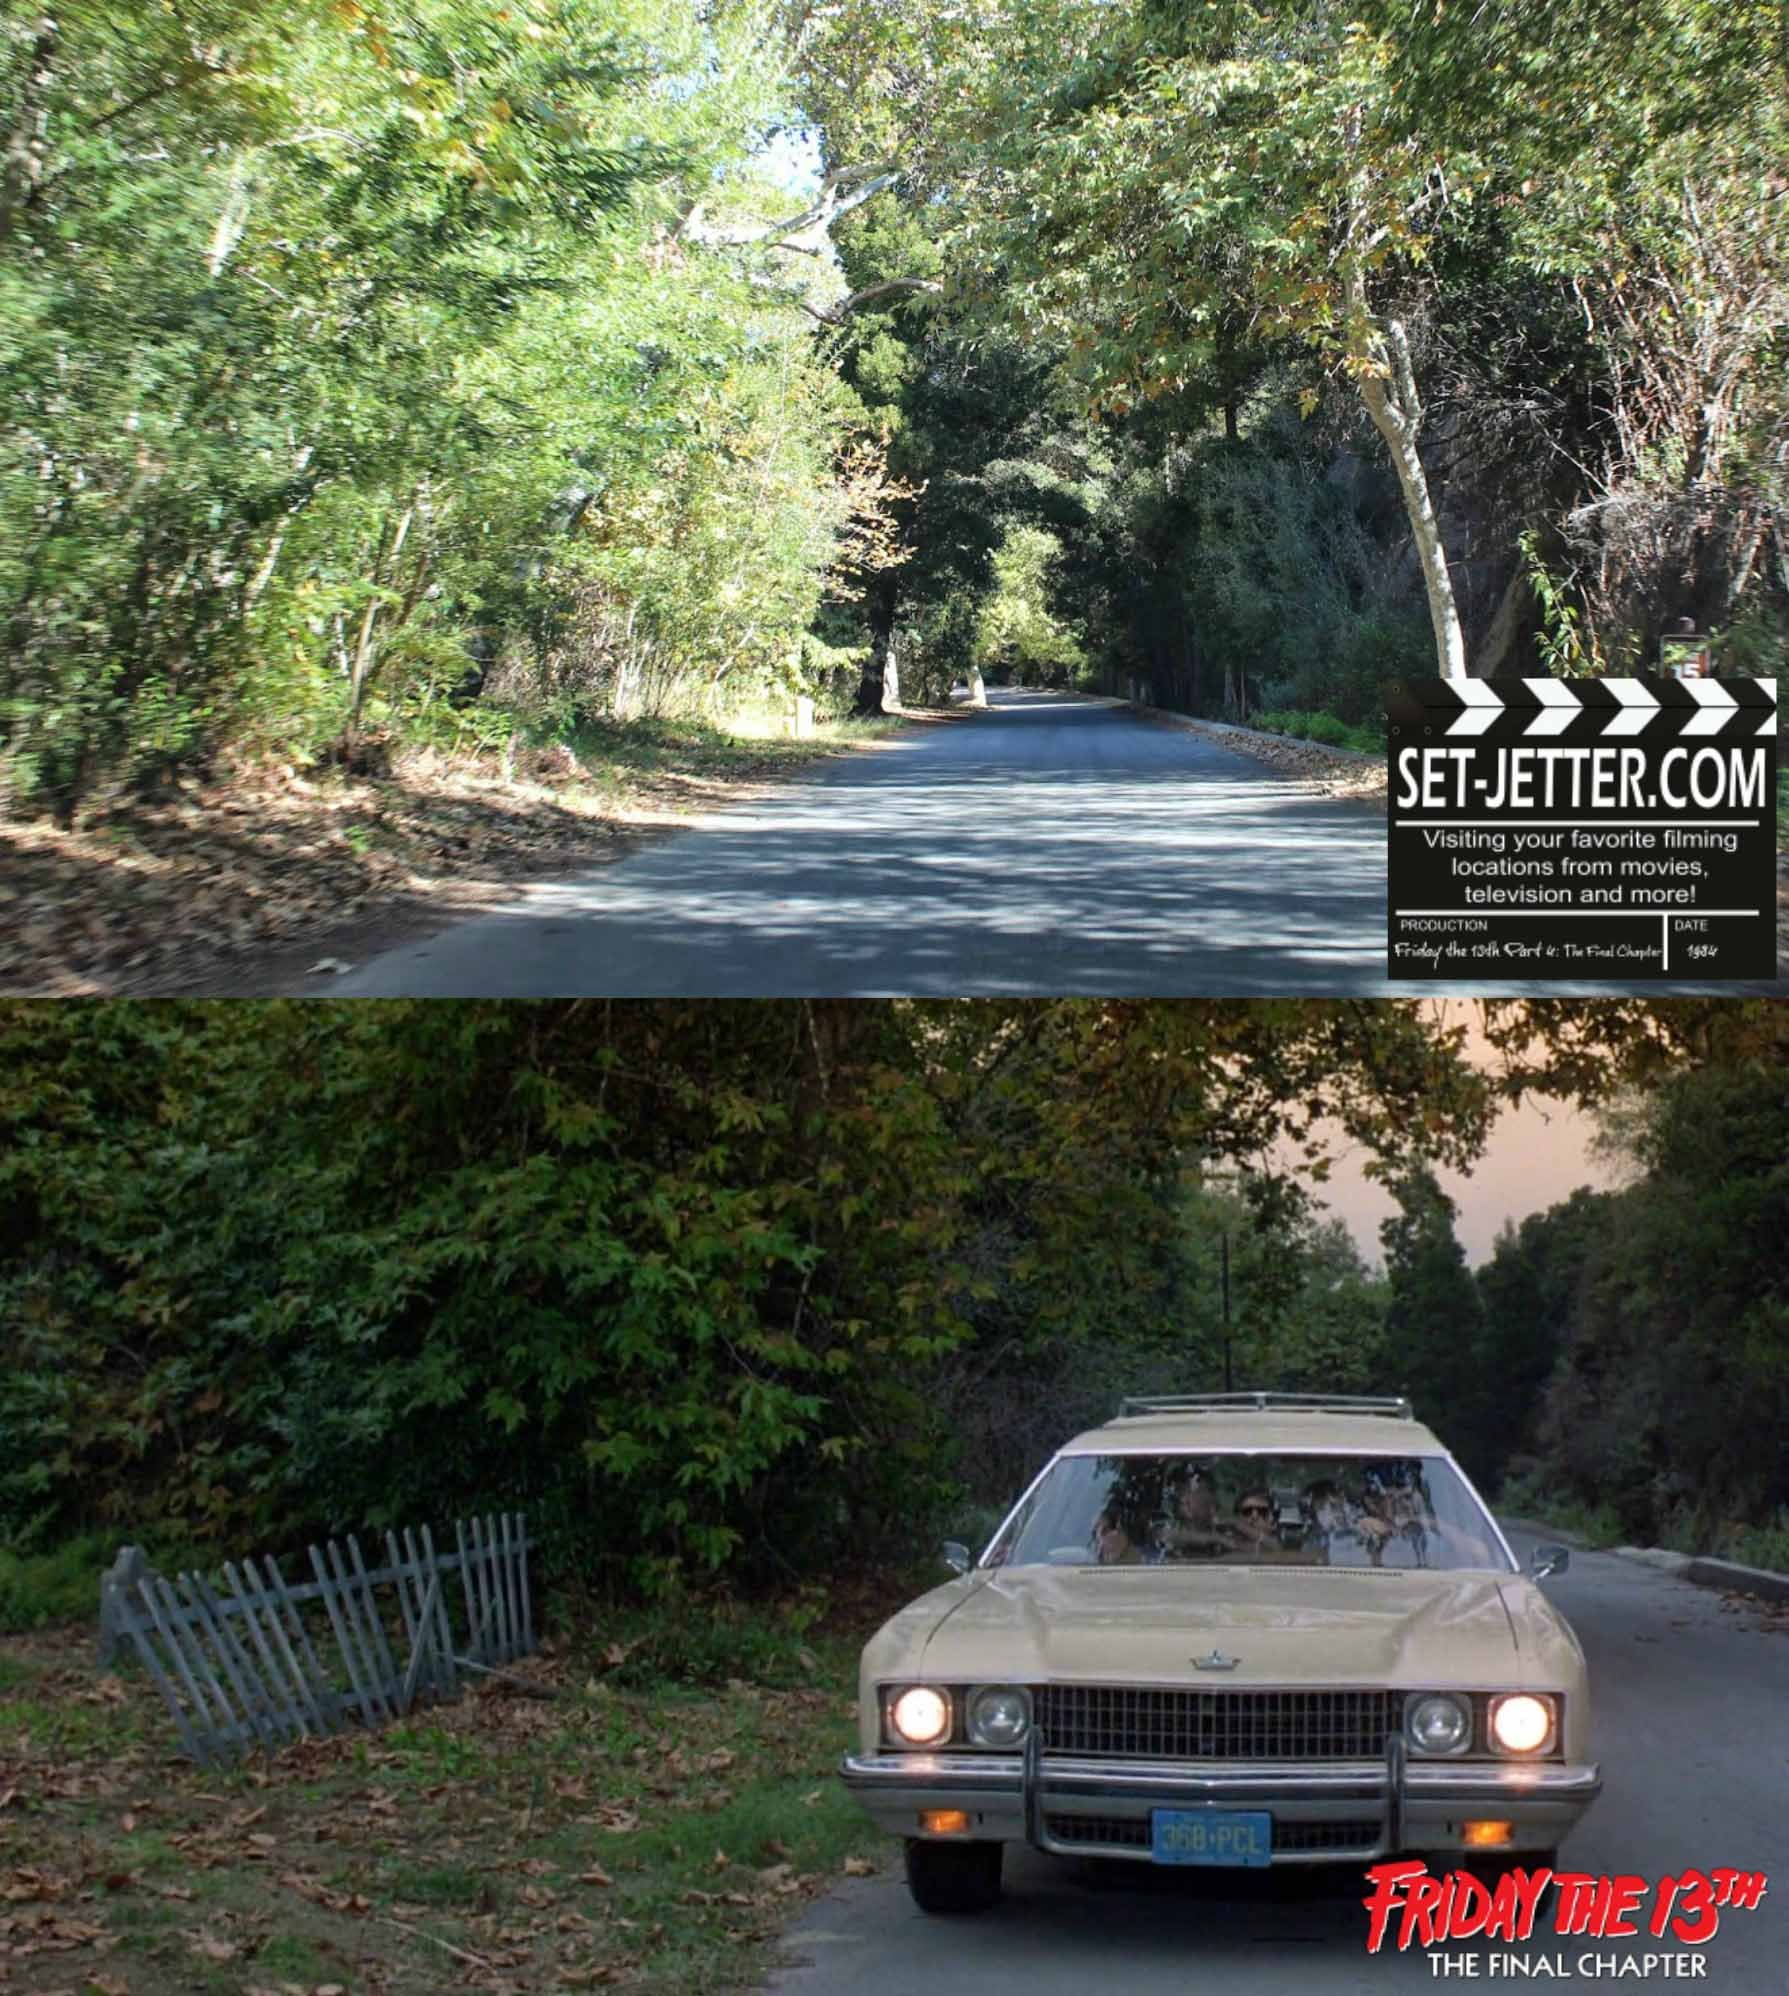 Friday the 13th The Final Chapter comparison 409.jpg